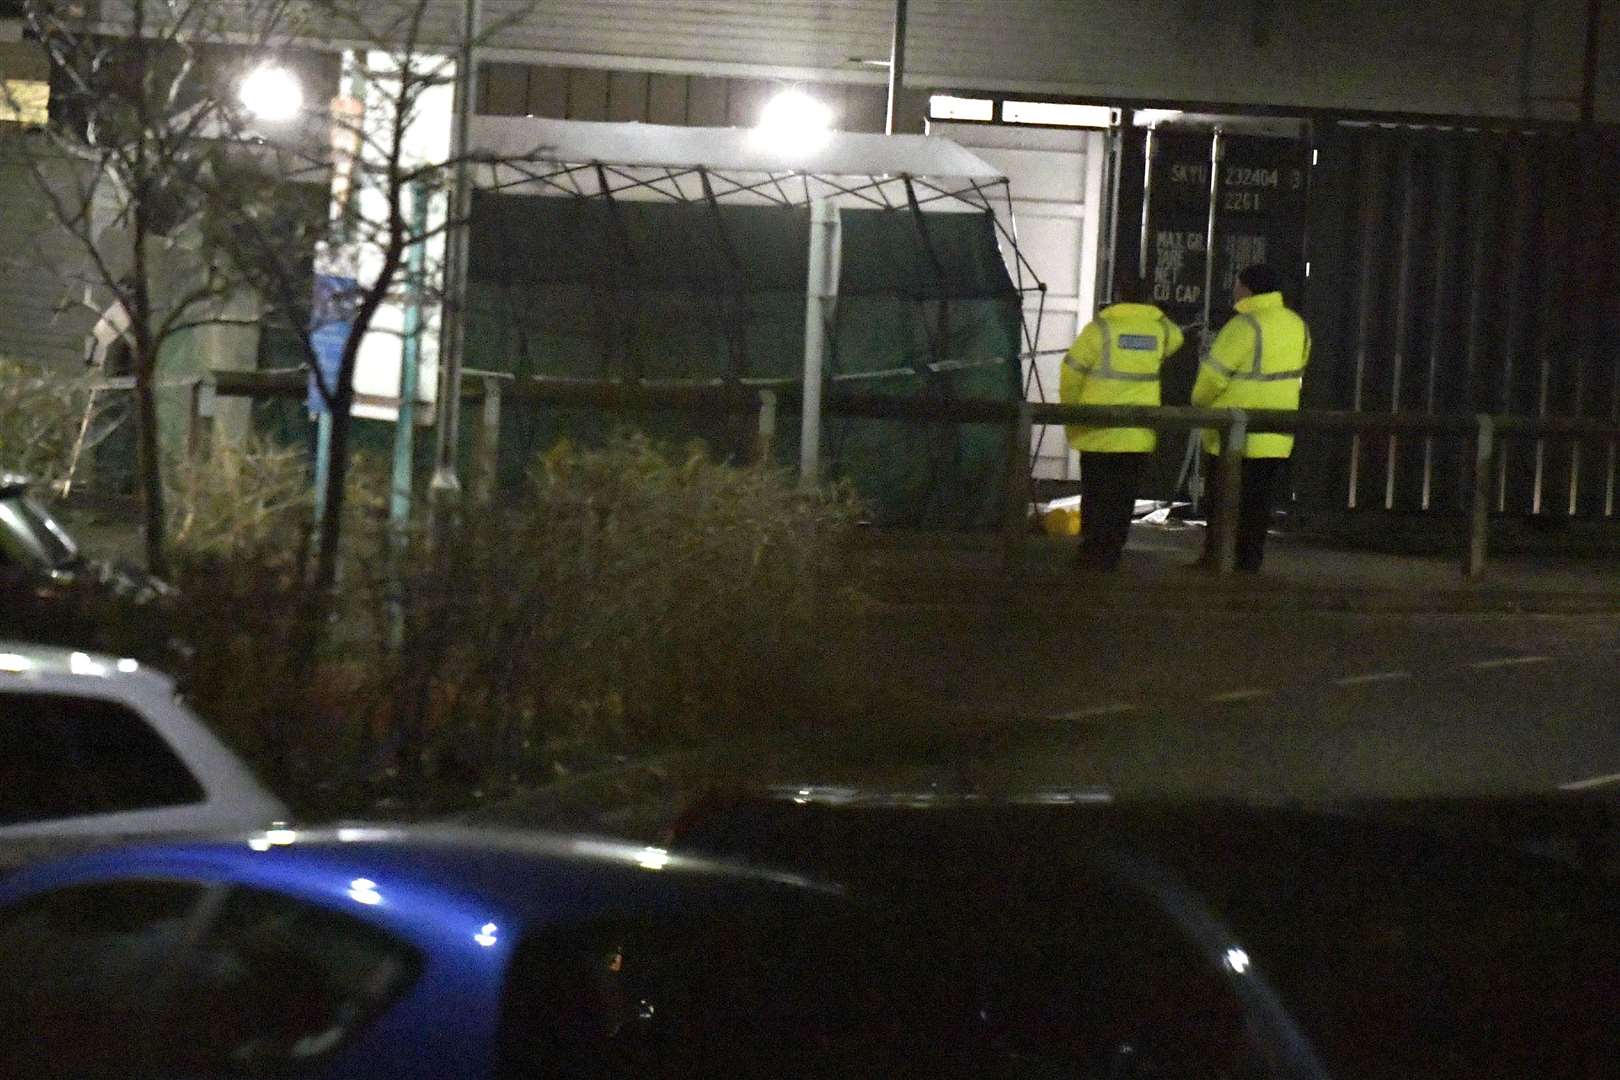 Tents were seen in the grounds of Maidstone hospital